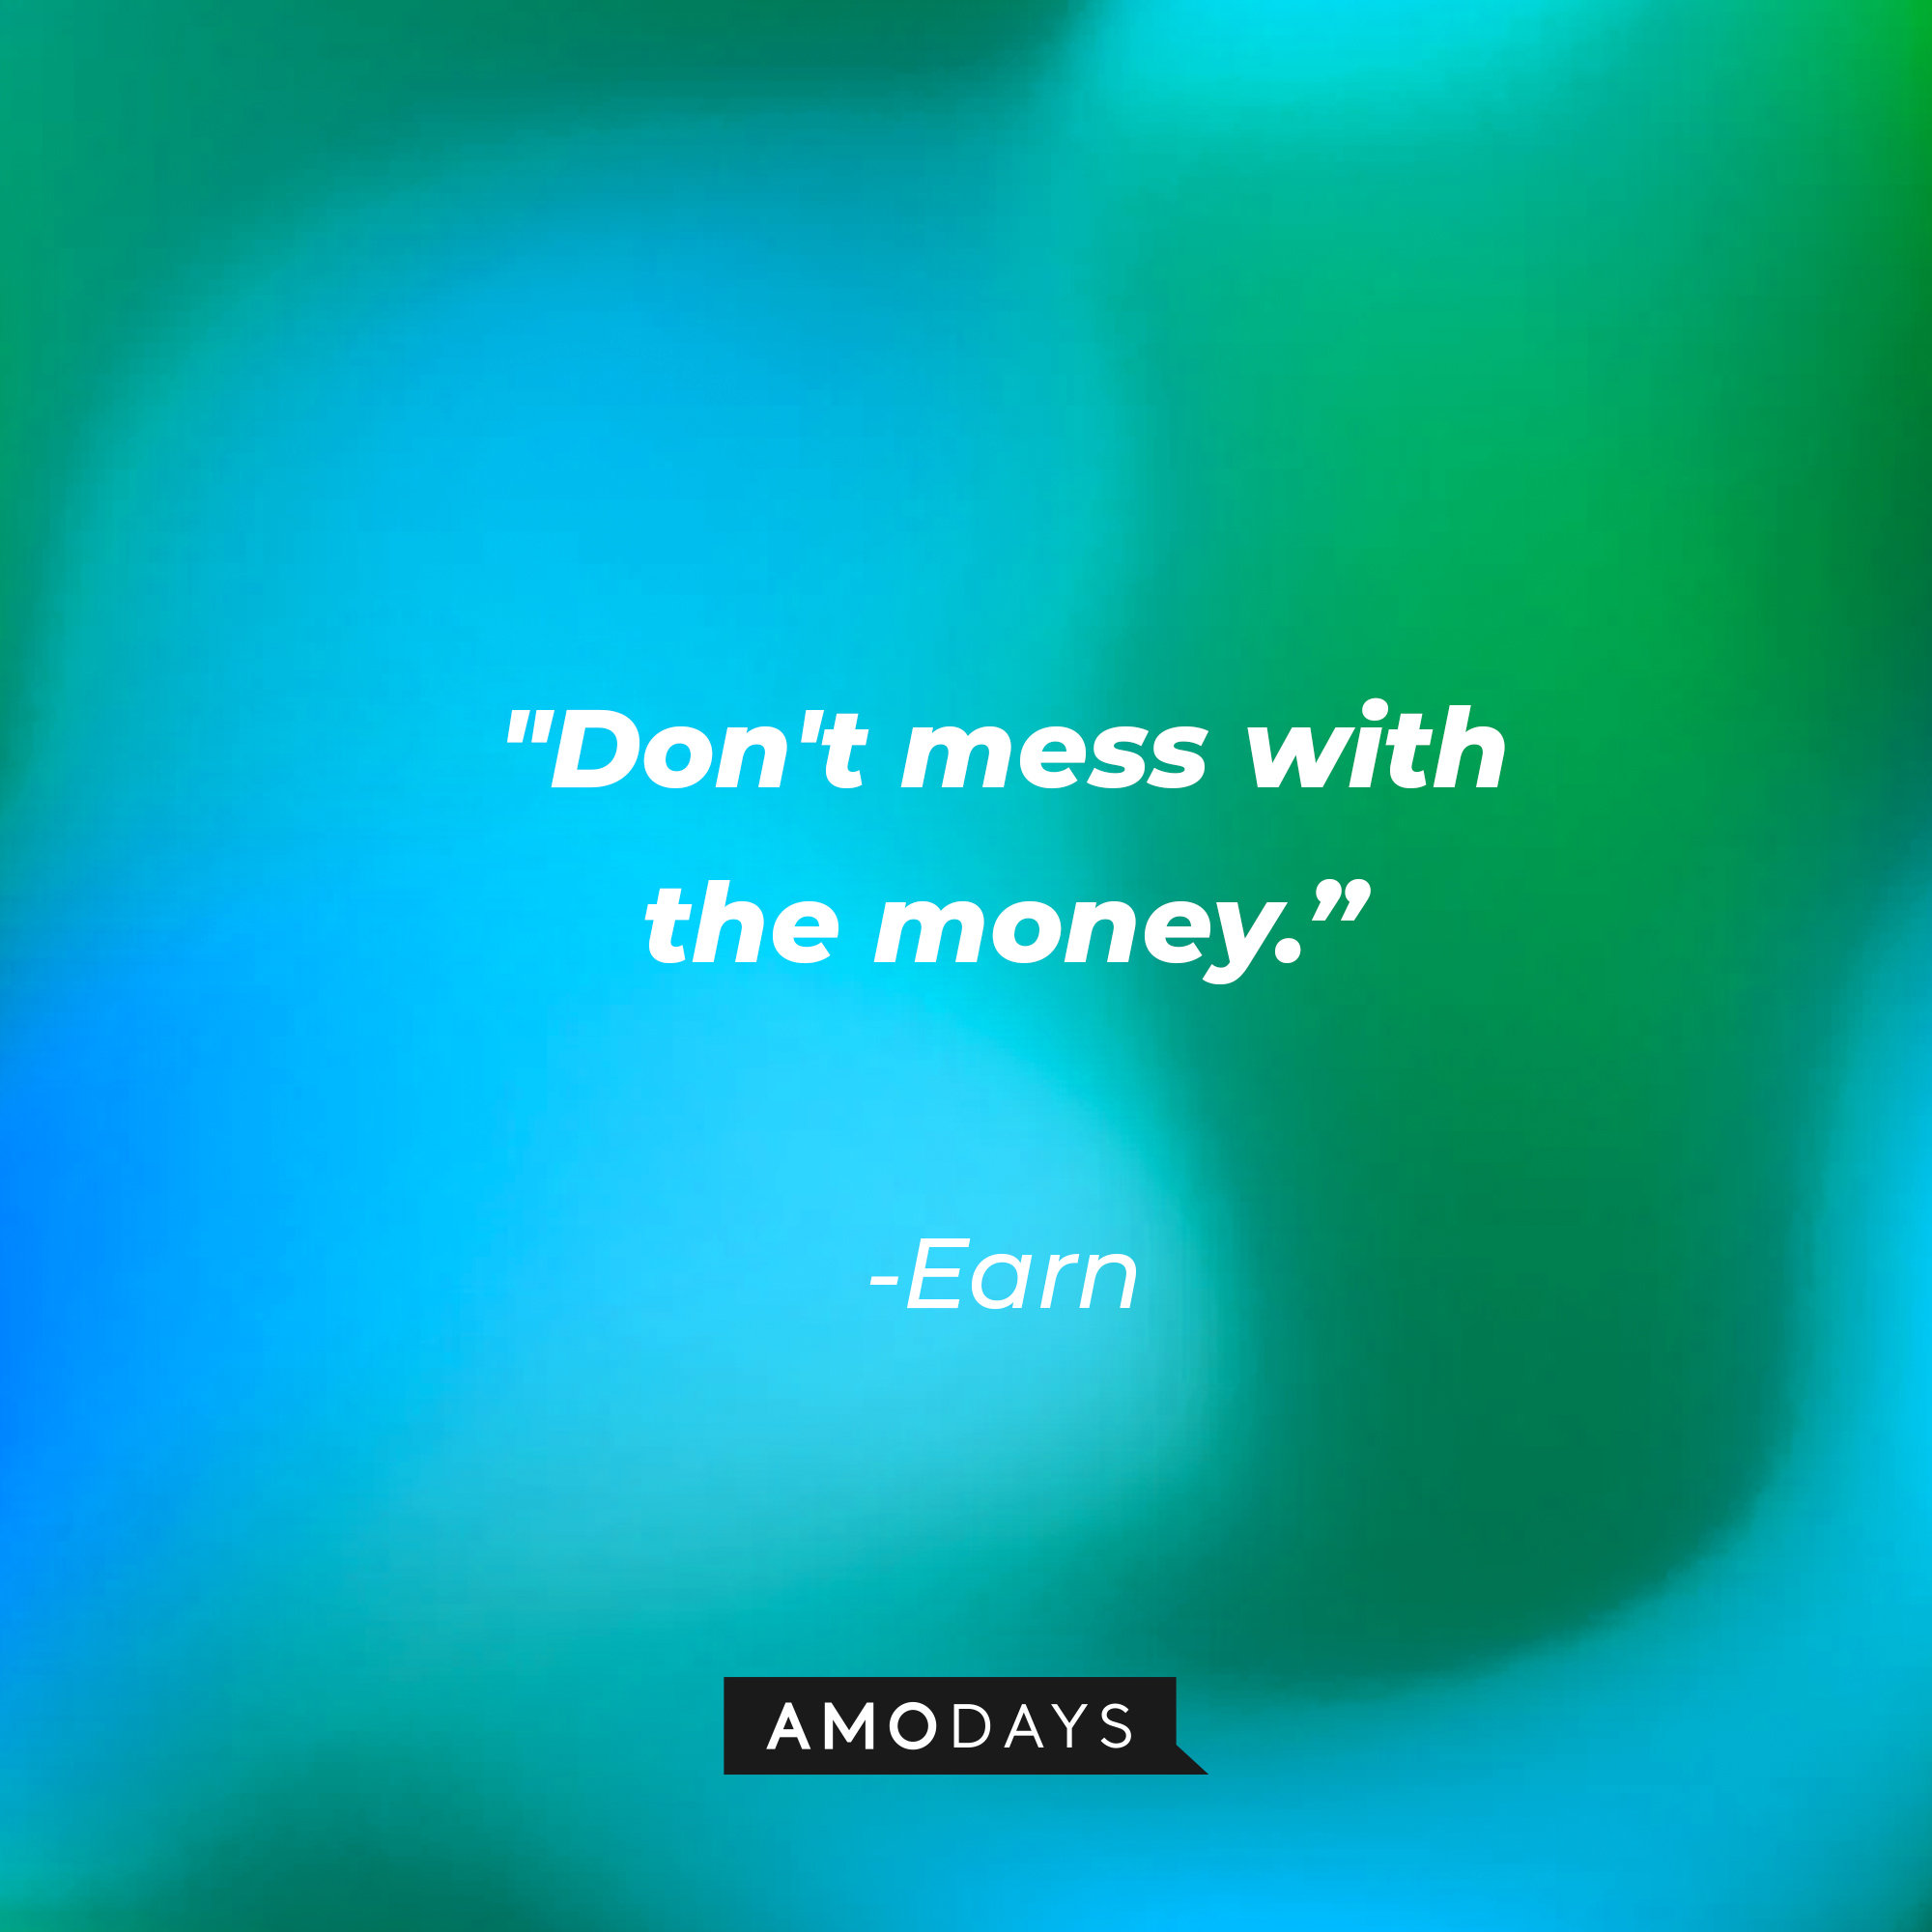 Earn’s quote: "Don't mess with the money.”  | Source: AmoDays